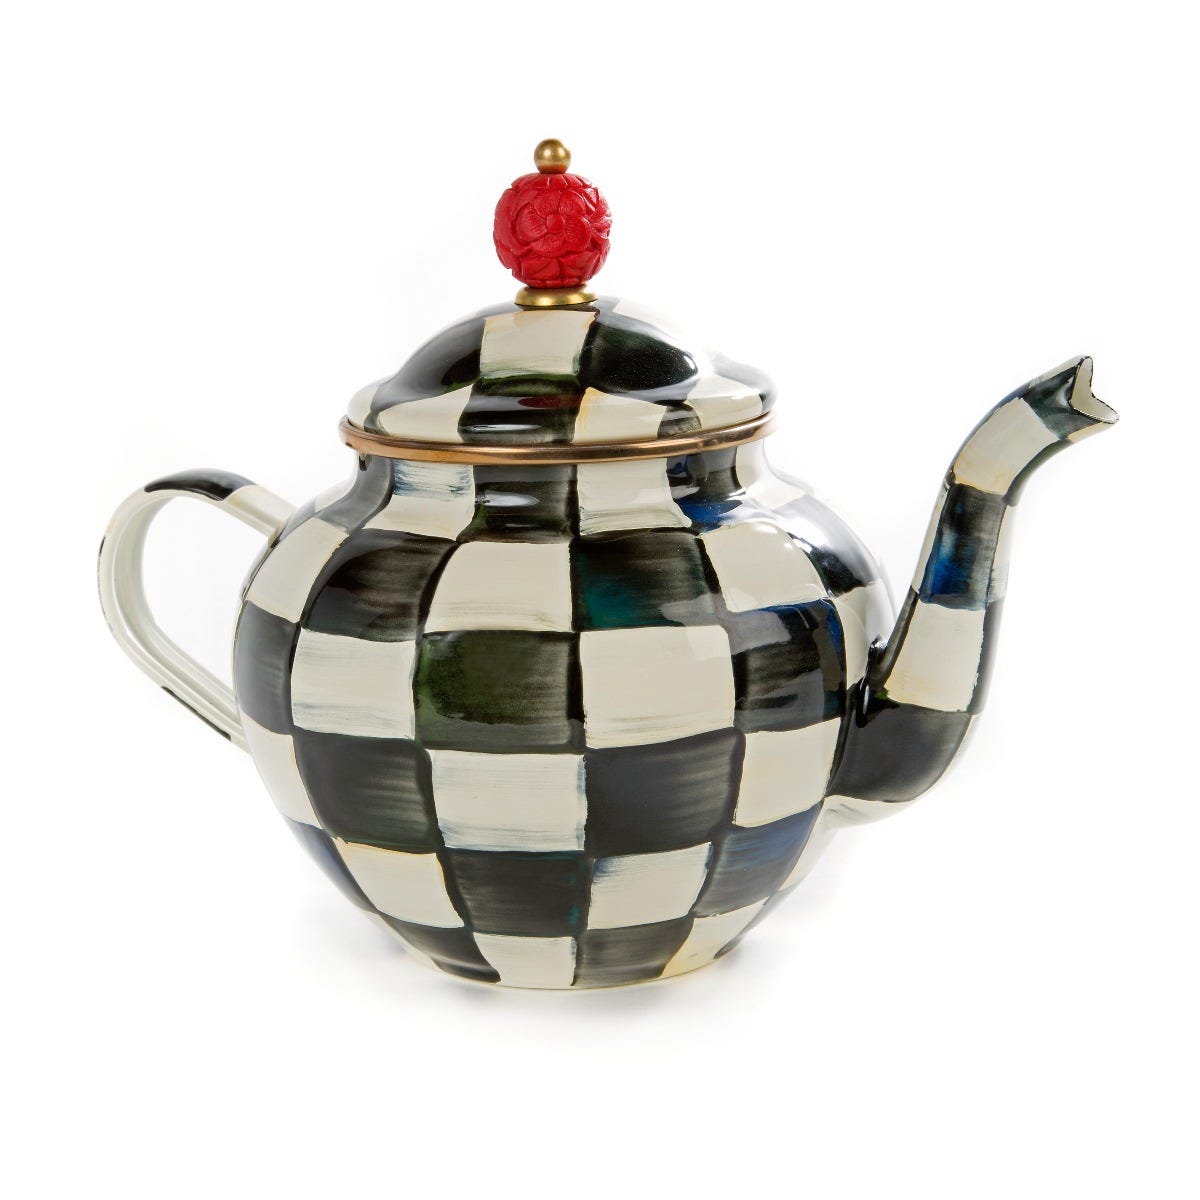 MacKenzie-Childs Courtly Check 4 Cup Enamel Teapot, Fortnum & Mason